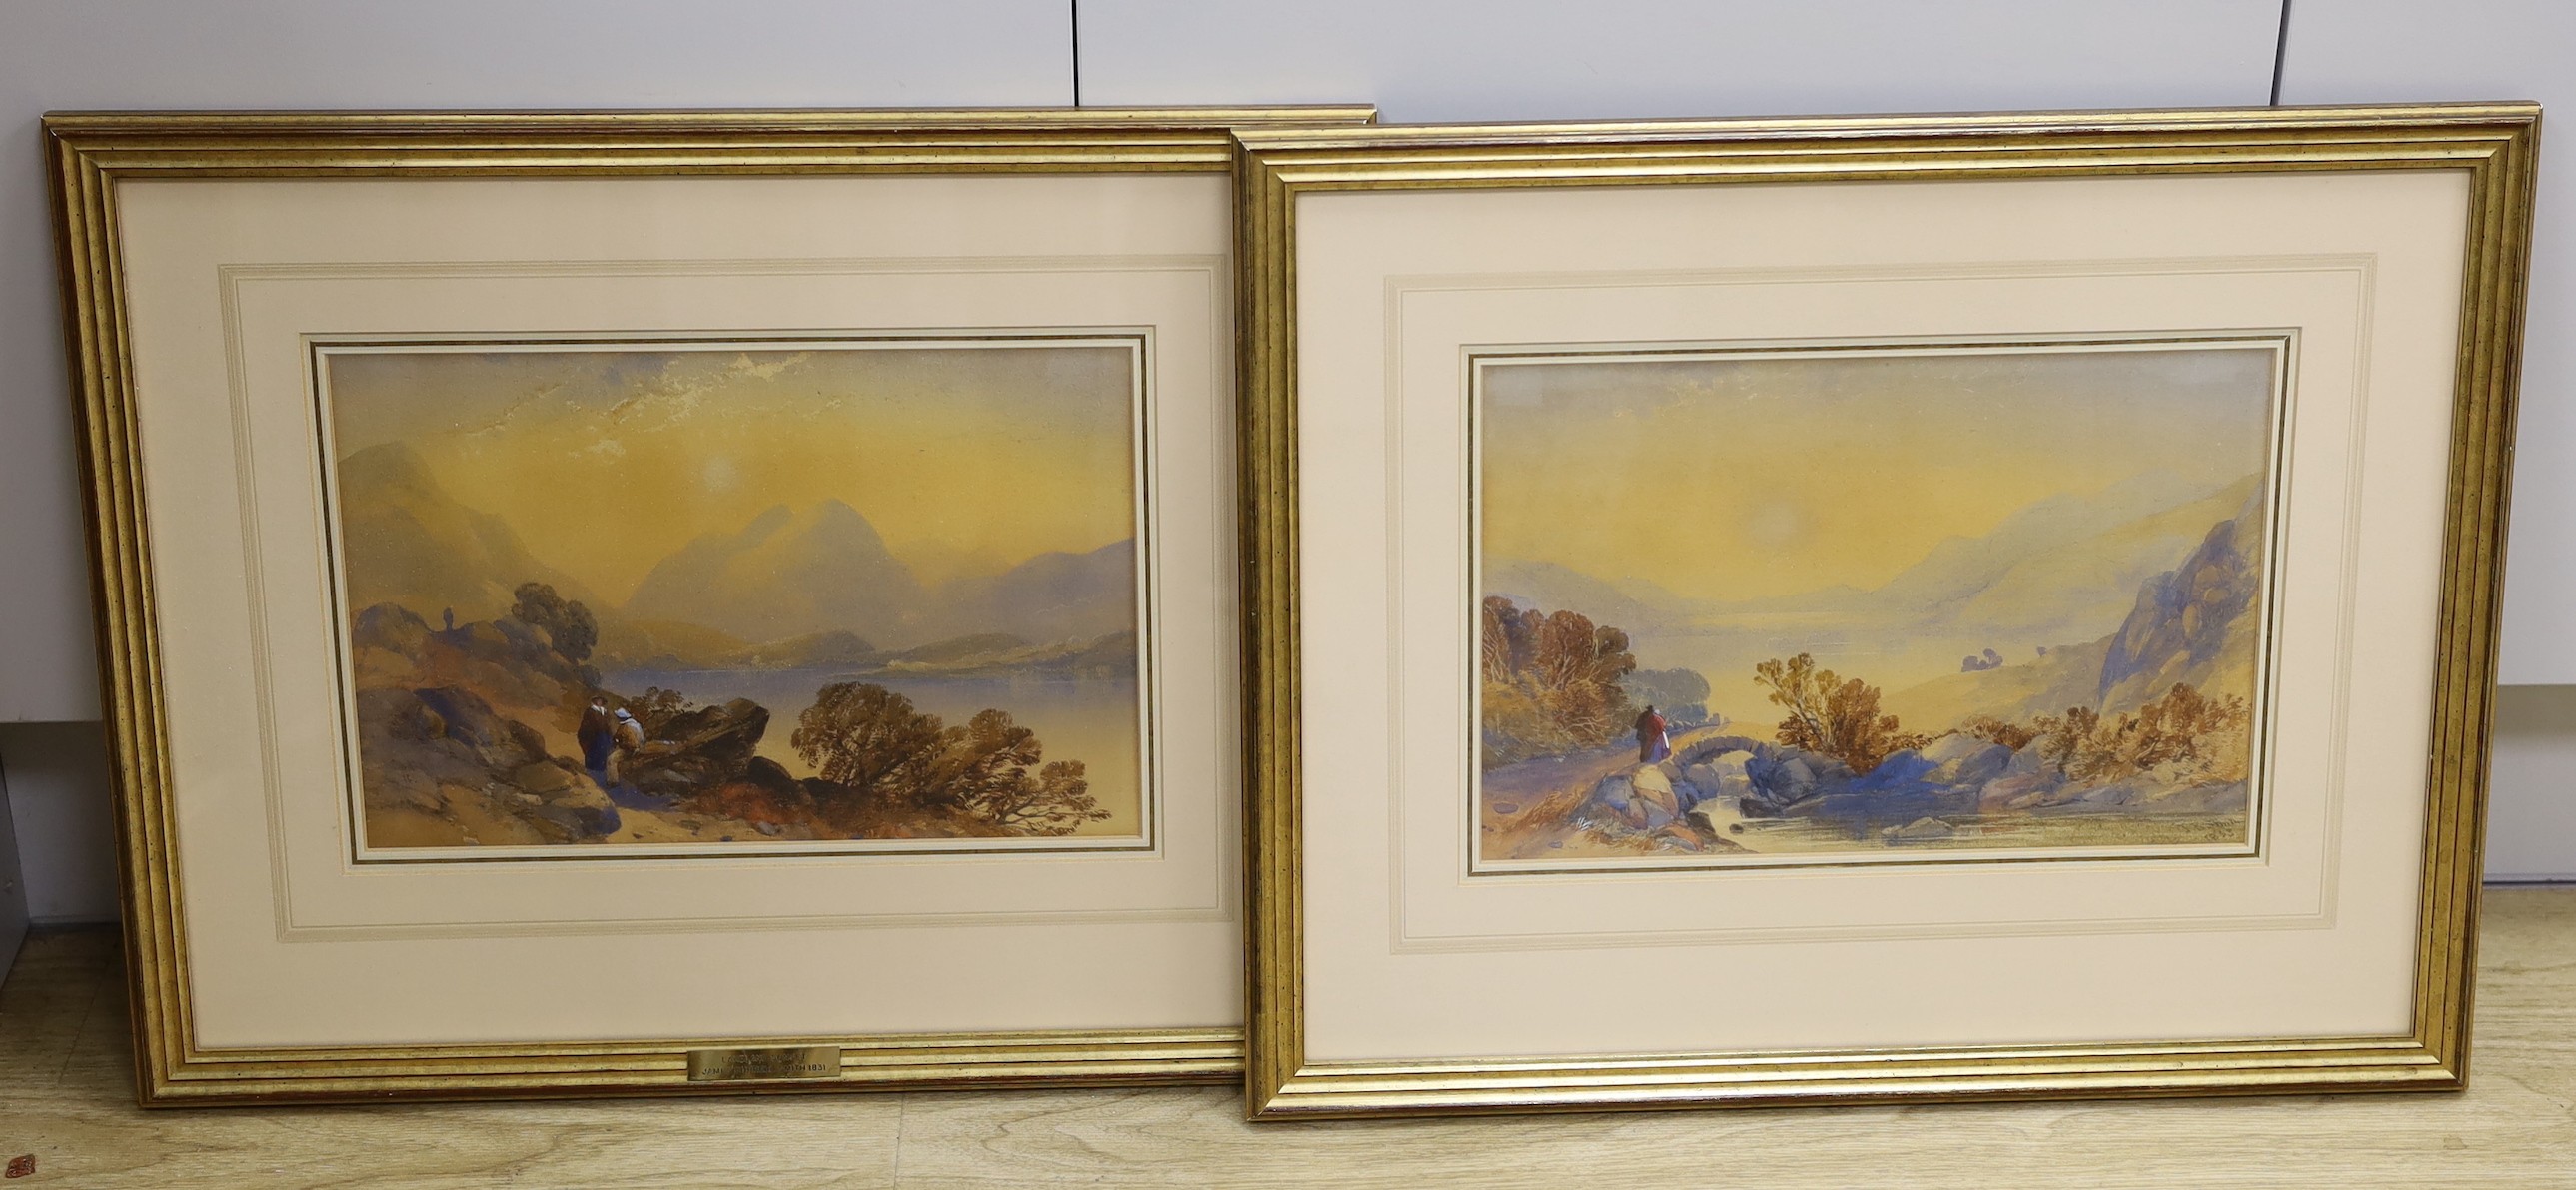 James Burrell Smith (1822-1897), pair of watercolours, Lakeland scenes, signed and dated 1833 / 1831, 22 x 33cm